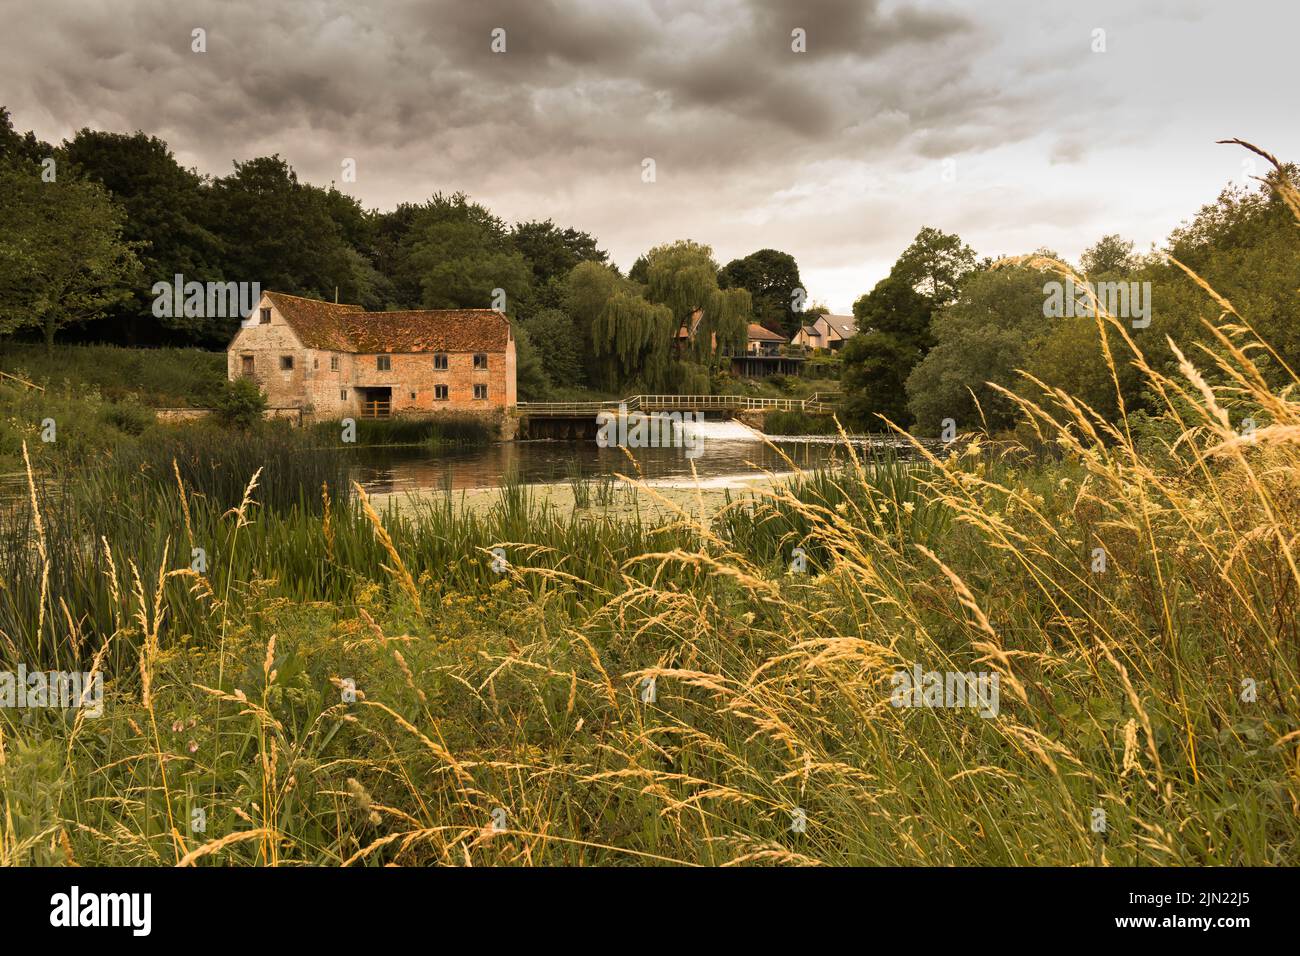 Sturminster Mill is a working flour mill located on the River Stour in Sturminster Newton Dorset UK and is mentioned in the Domesday book of 1086. Stock Photo